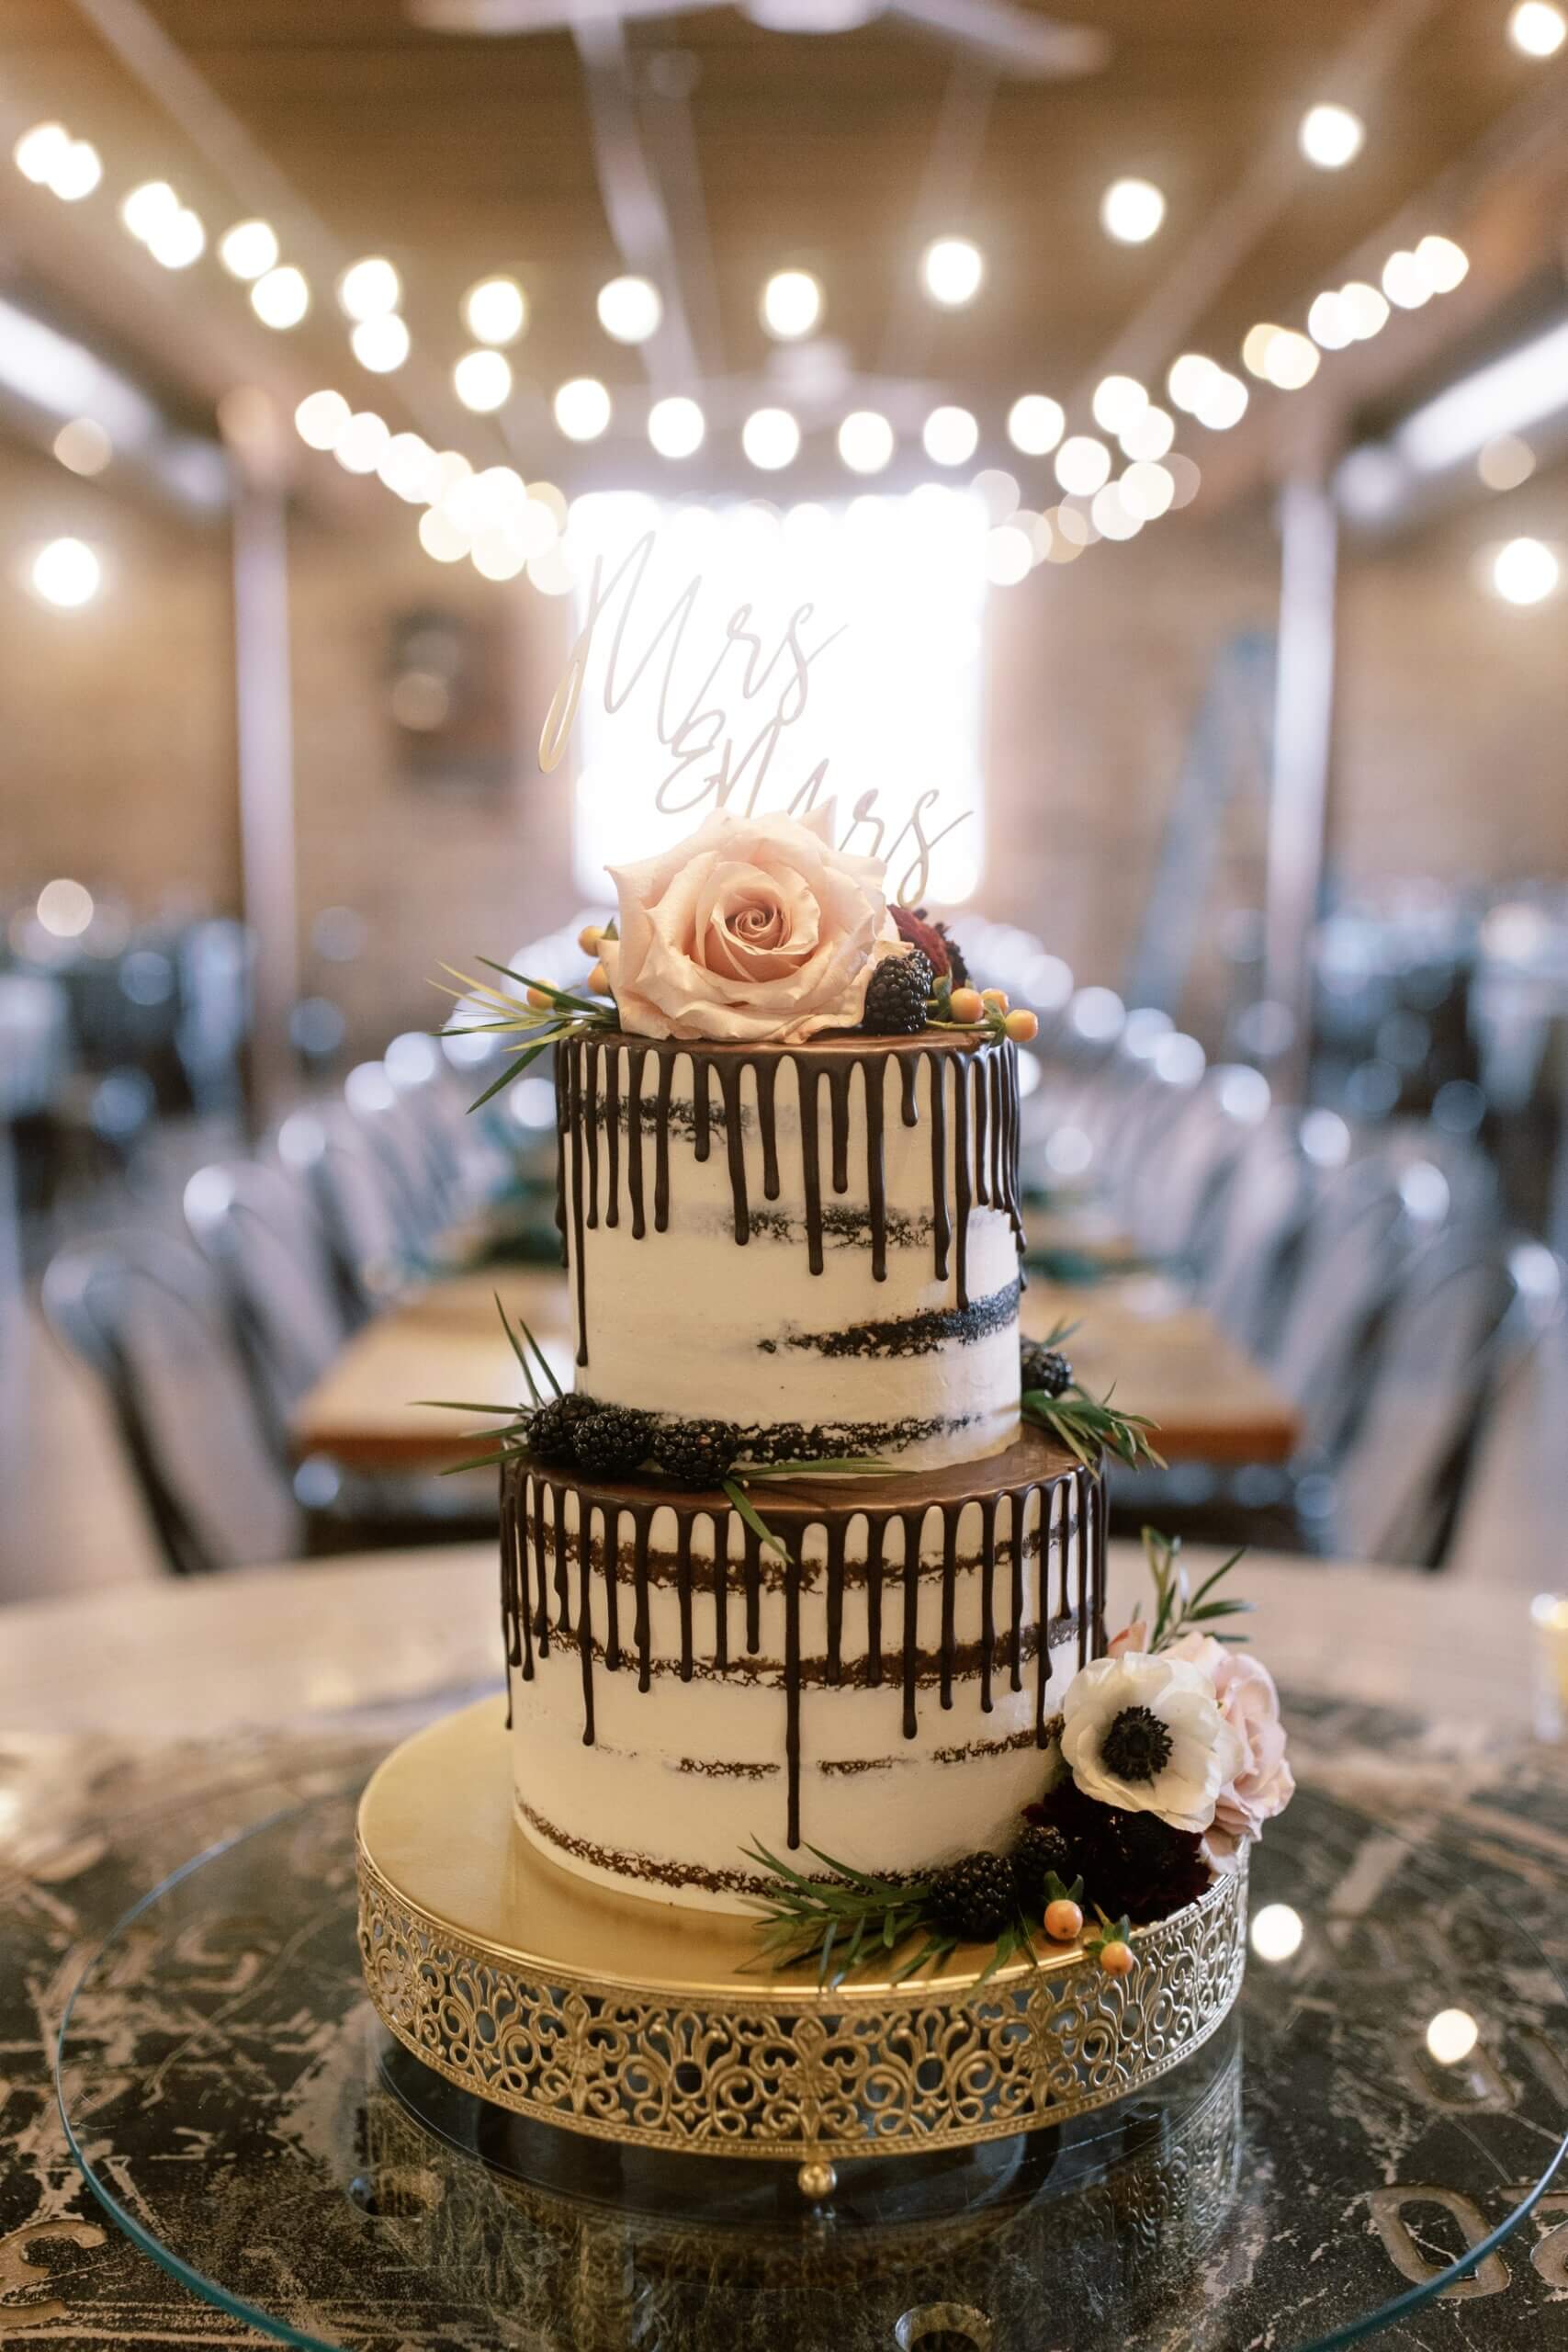 Two tier white wedding cake with black drip icing